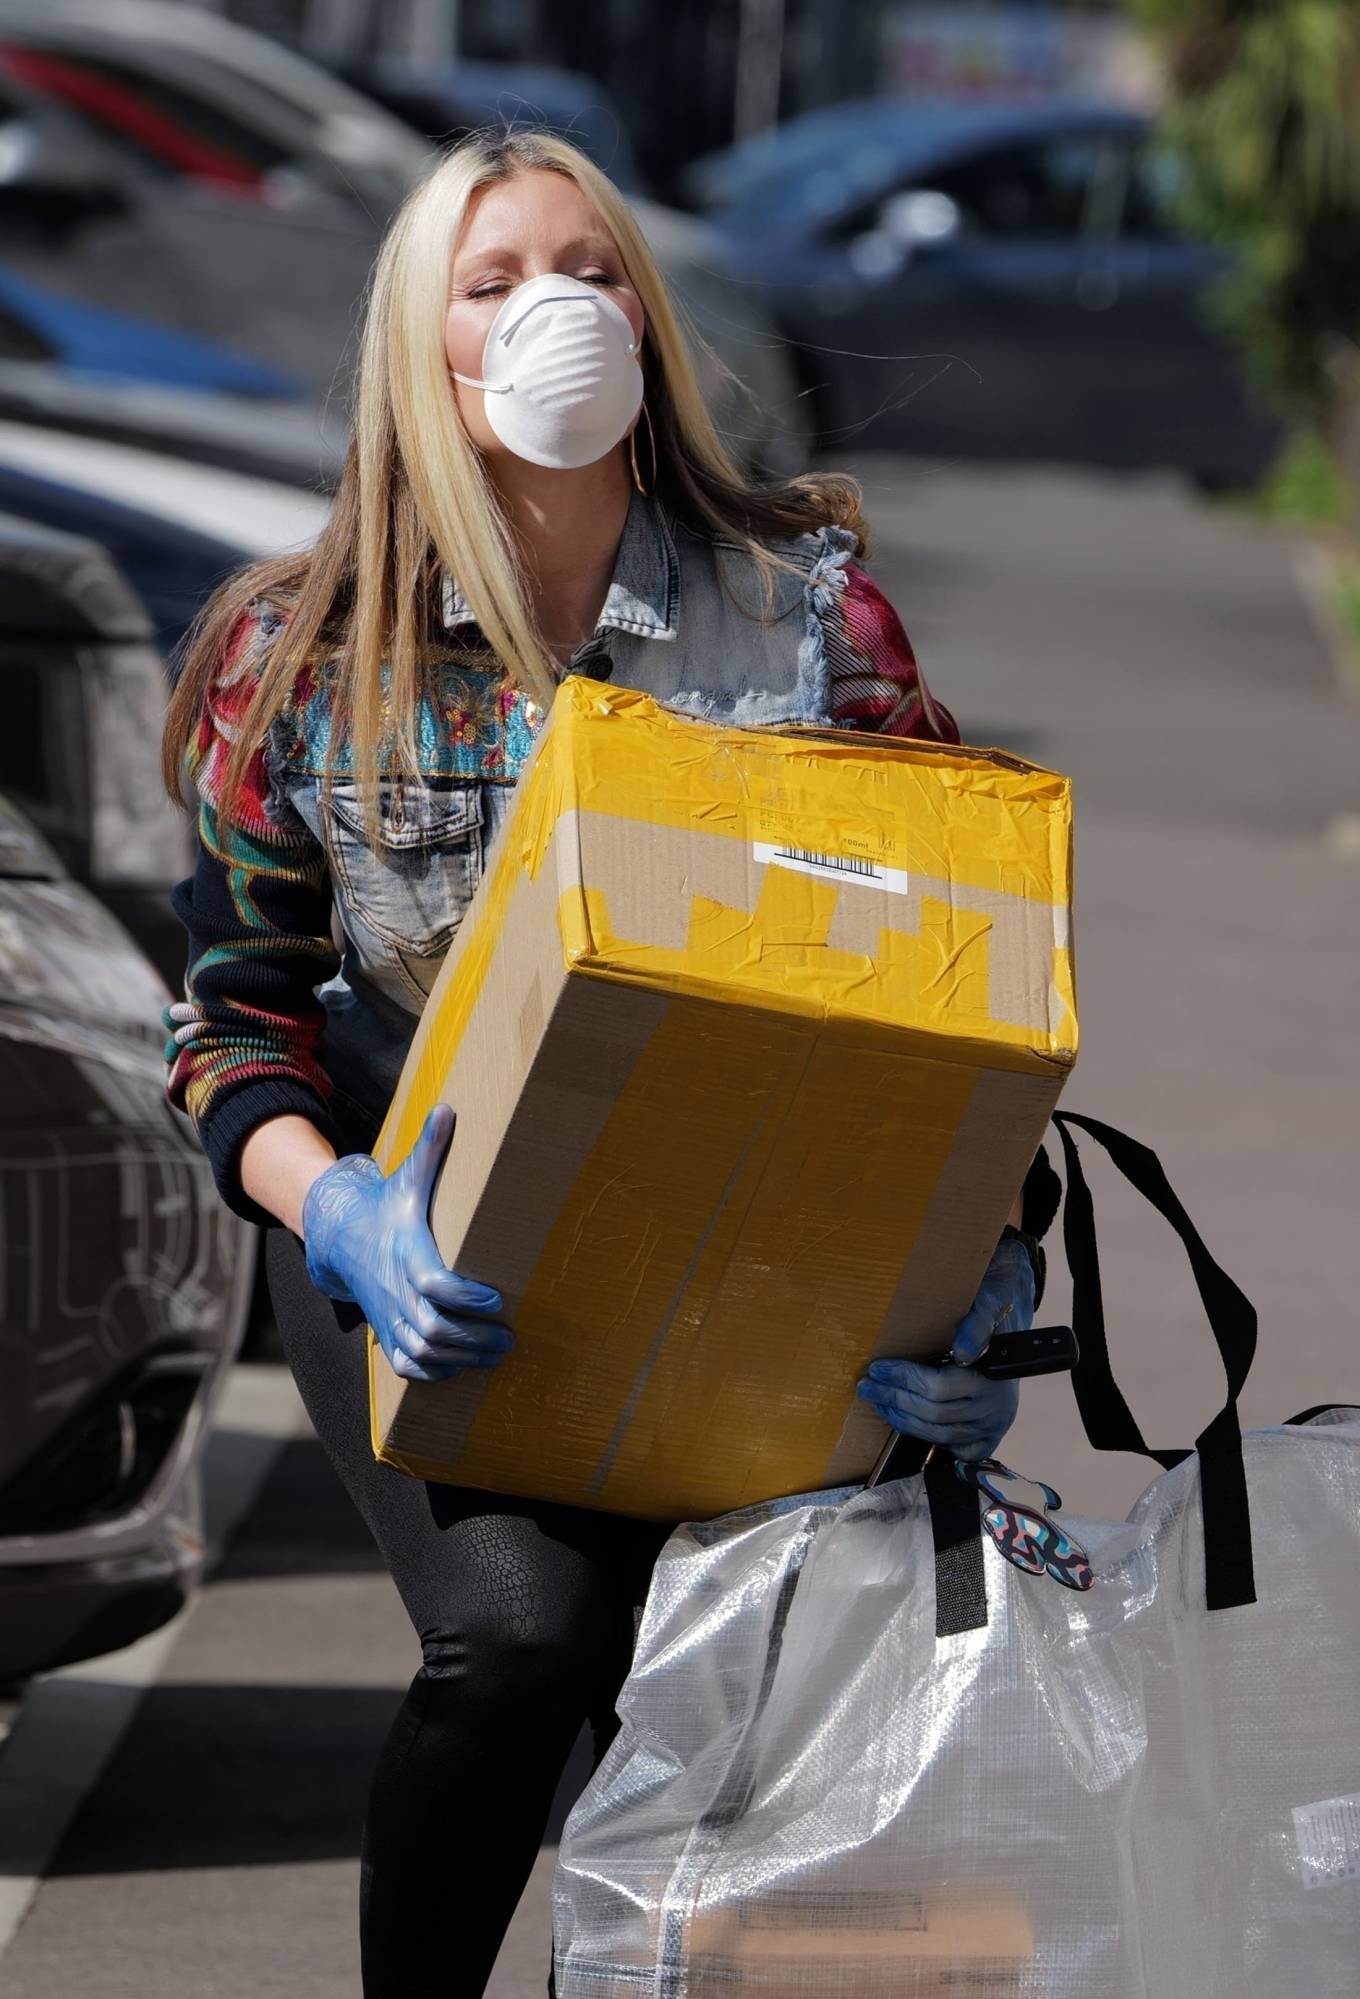 Caprice Bourret - Caying care packages to NHS staff during the coronavirus pandemic